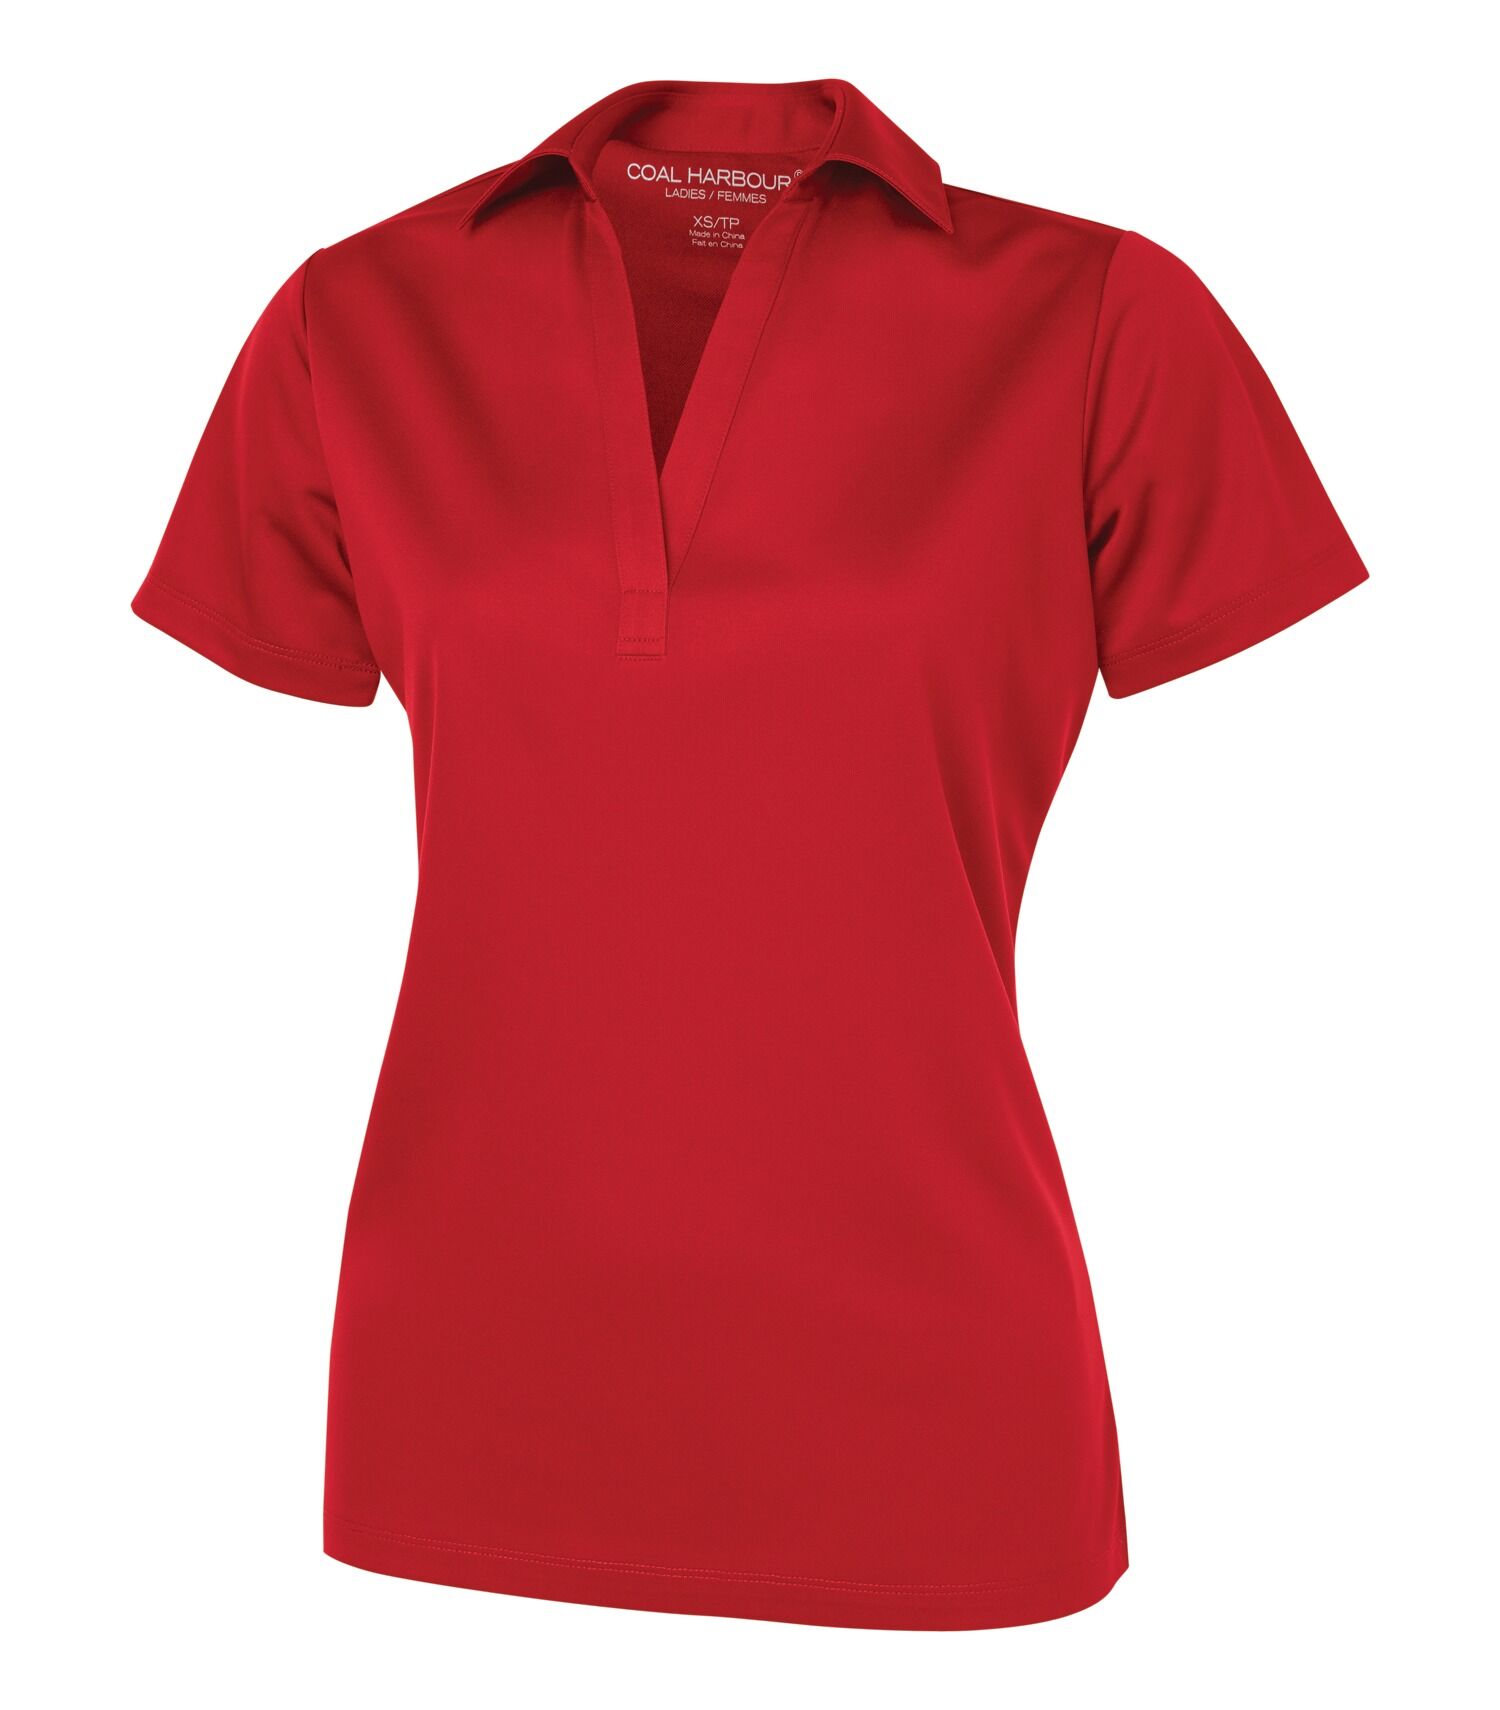 COAL HARBOUR LADIES EVERYDAY SPORT SHIRT #L4007 Red